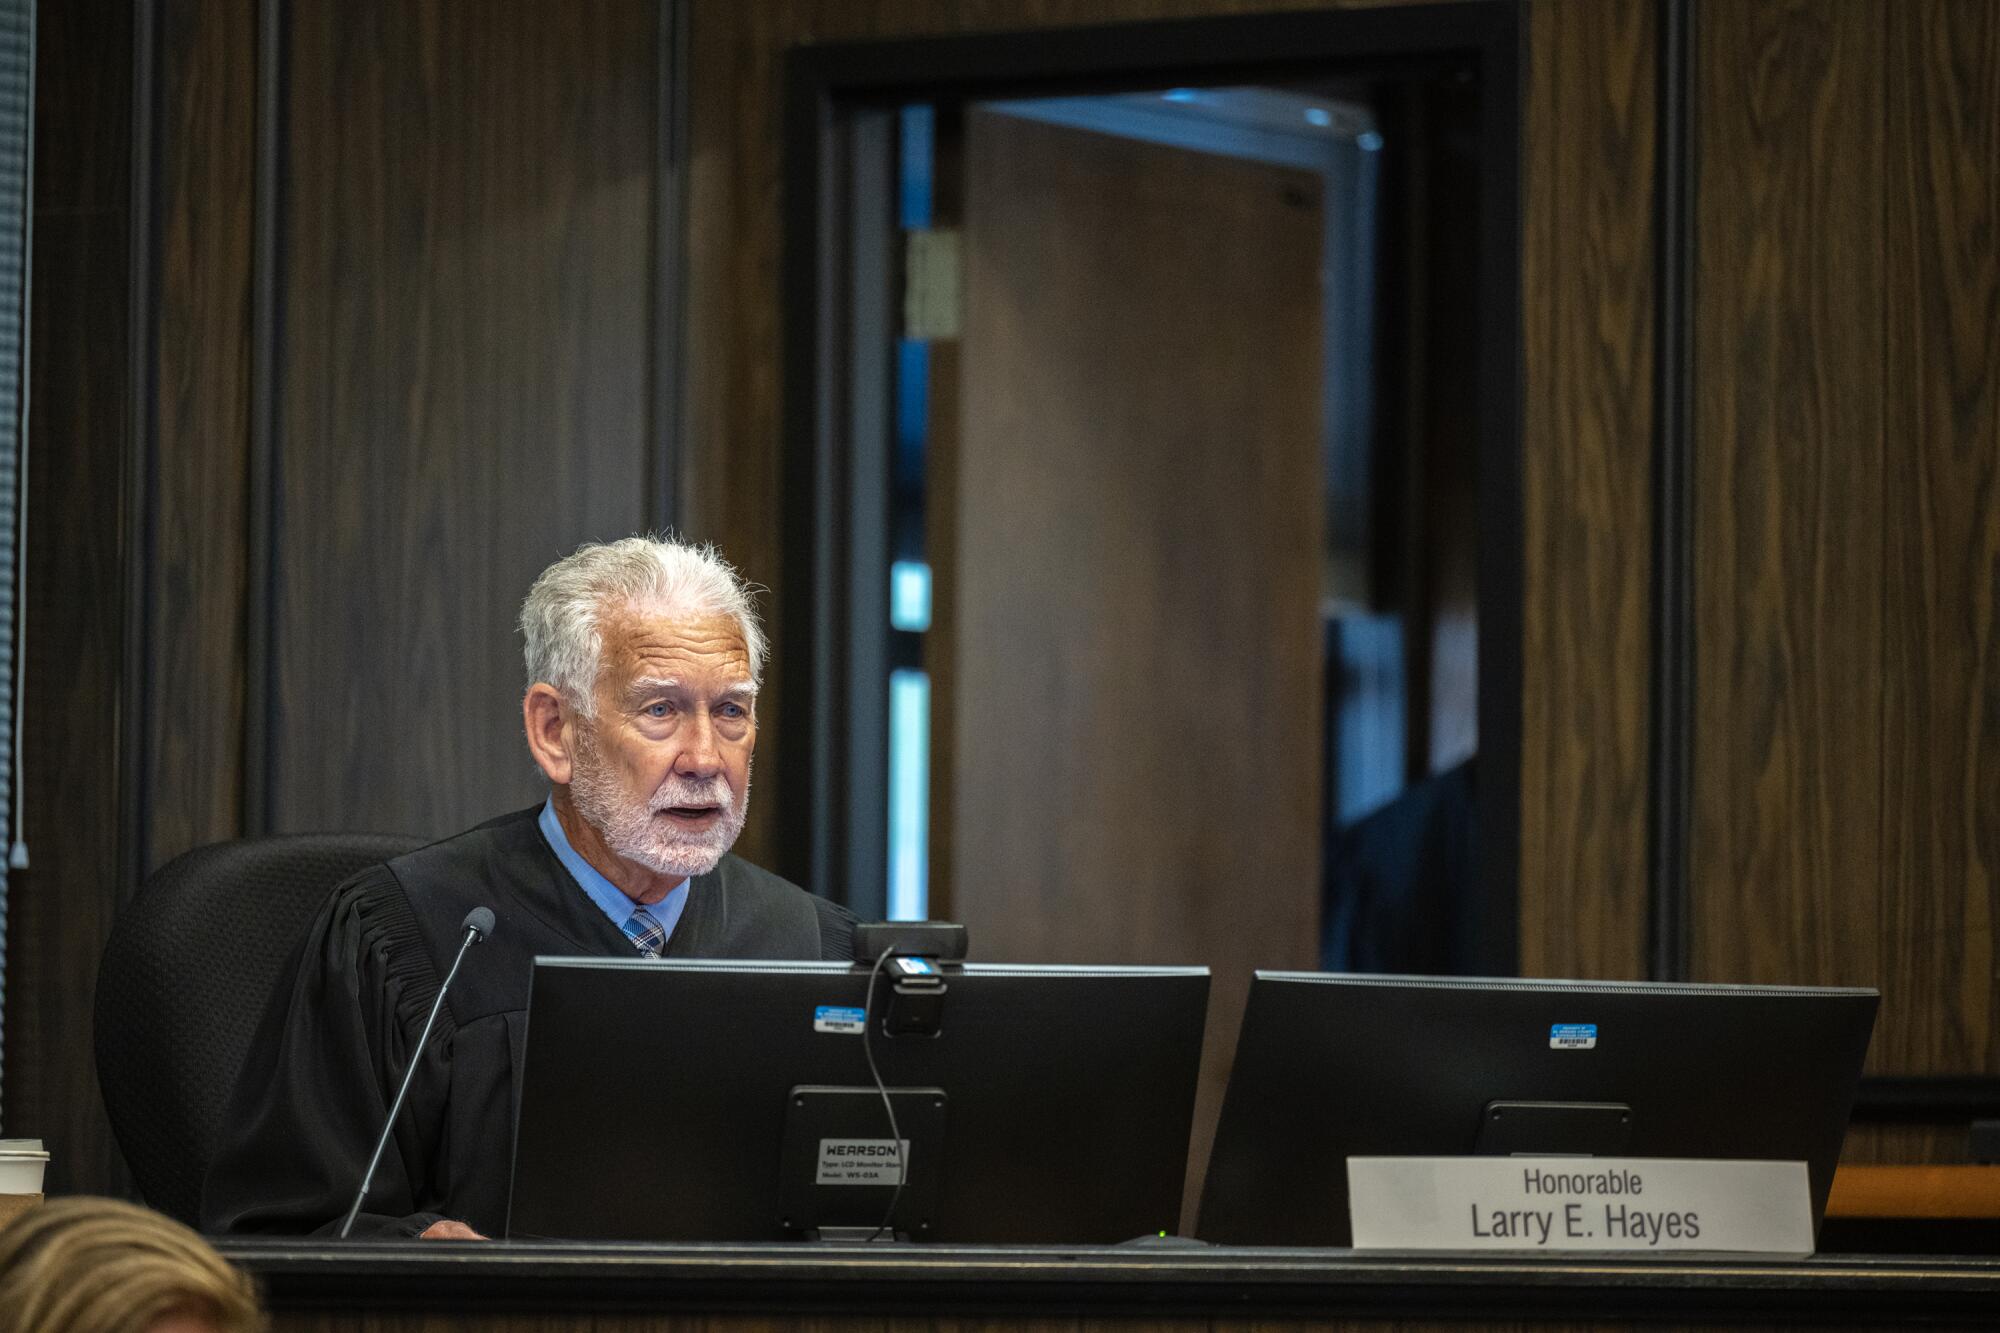 Judge Larry E. Hayes is seated at the bench with two computer monitors and a microphone